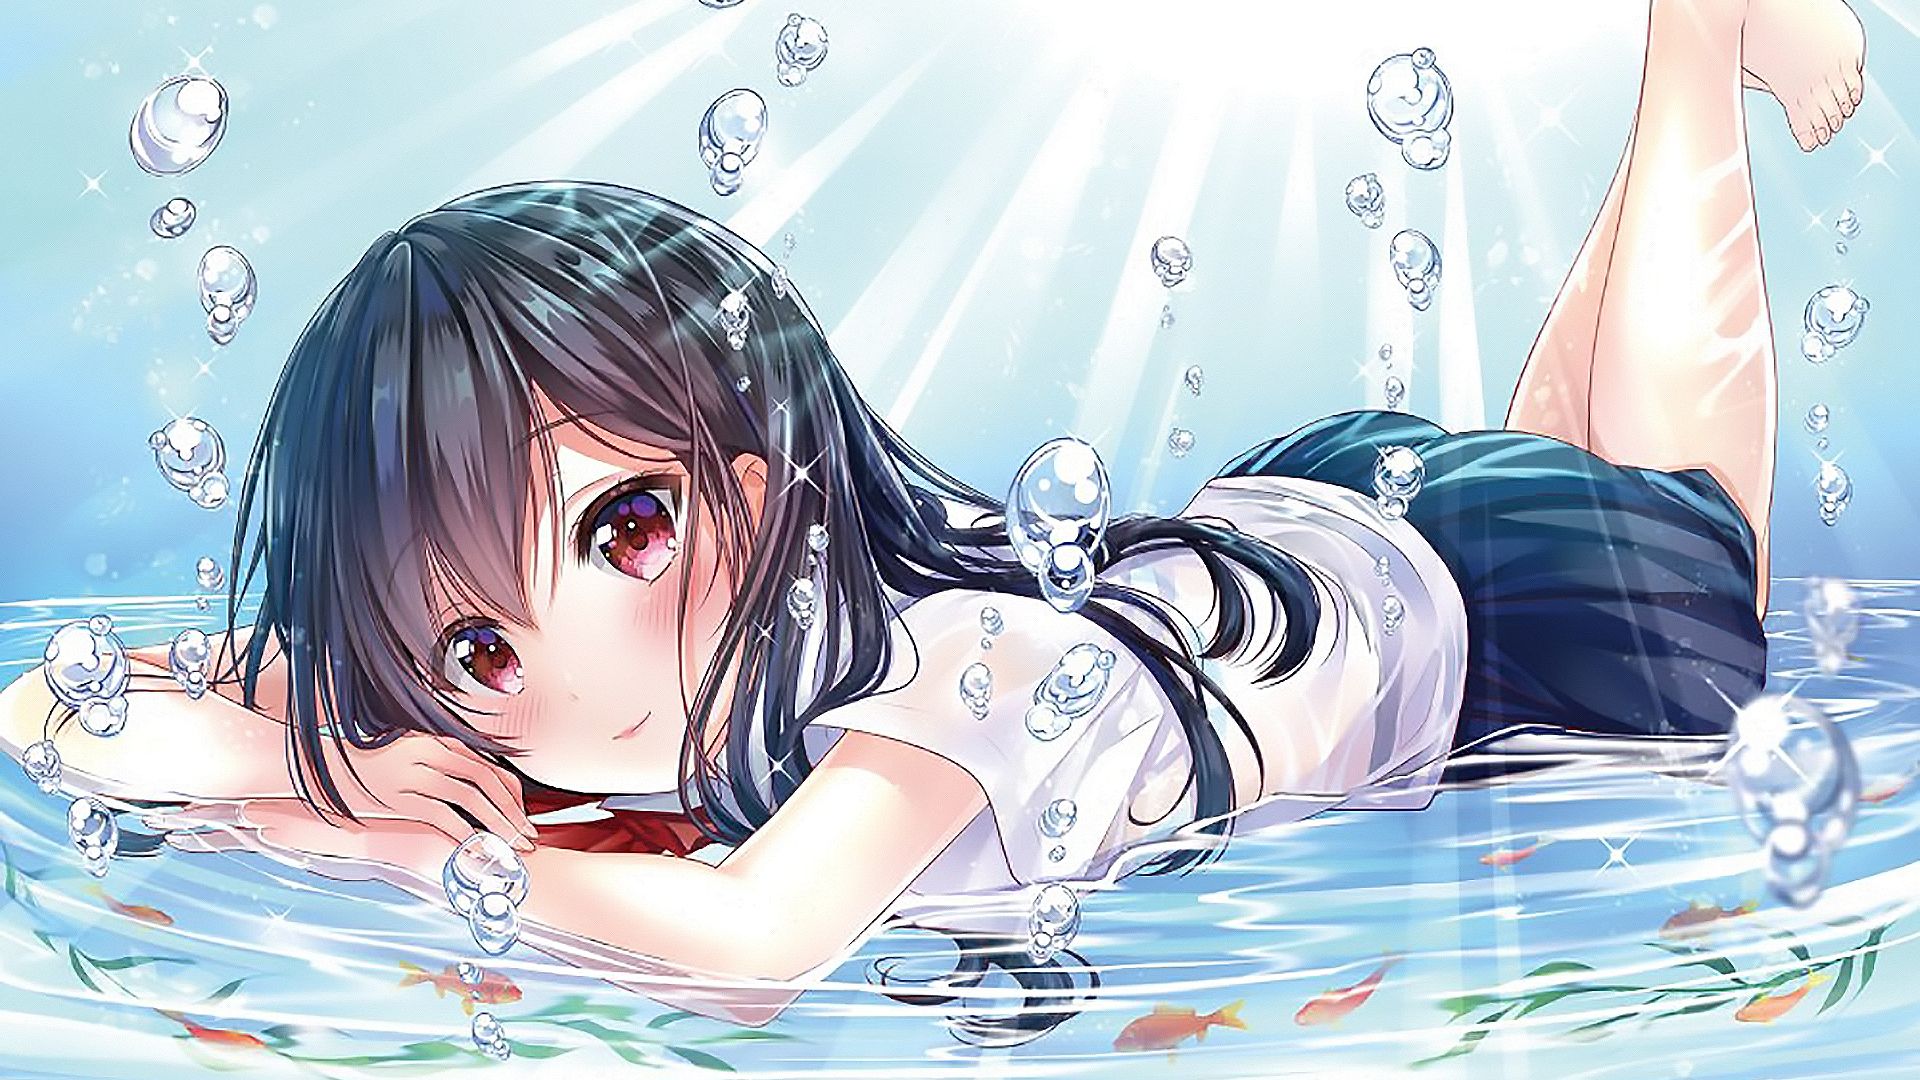 Lying Down By Sabinaa Pluspng  Anime Boy Laying Down  1052x450 PNG  Download  PNGkit